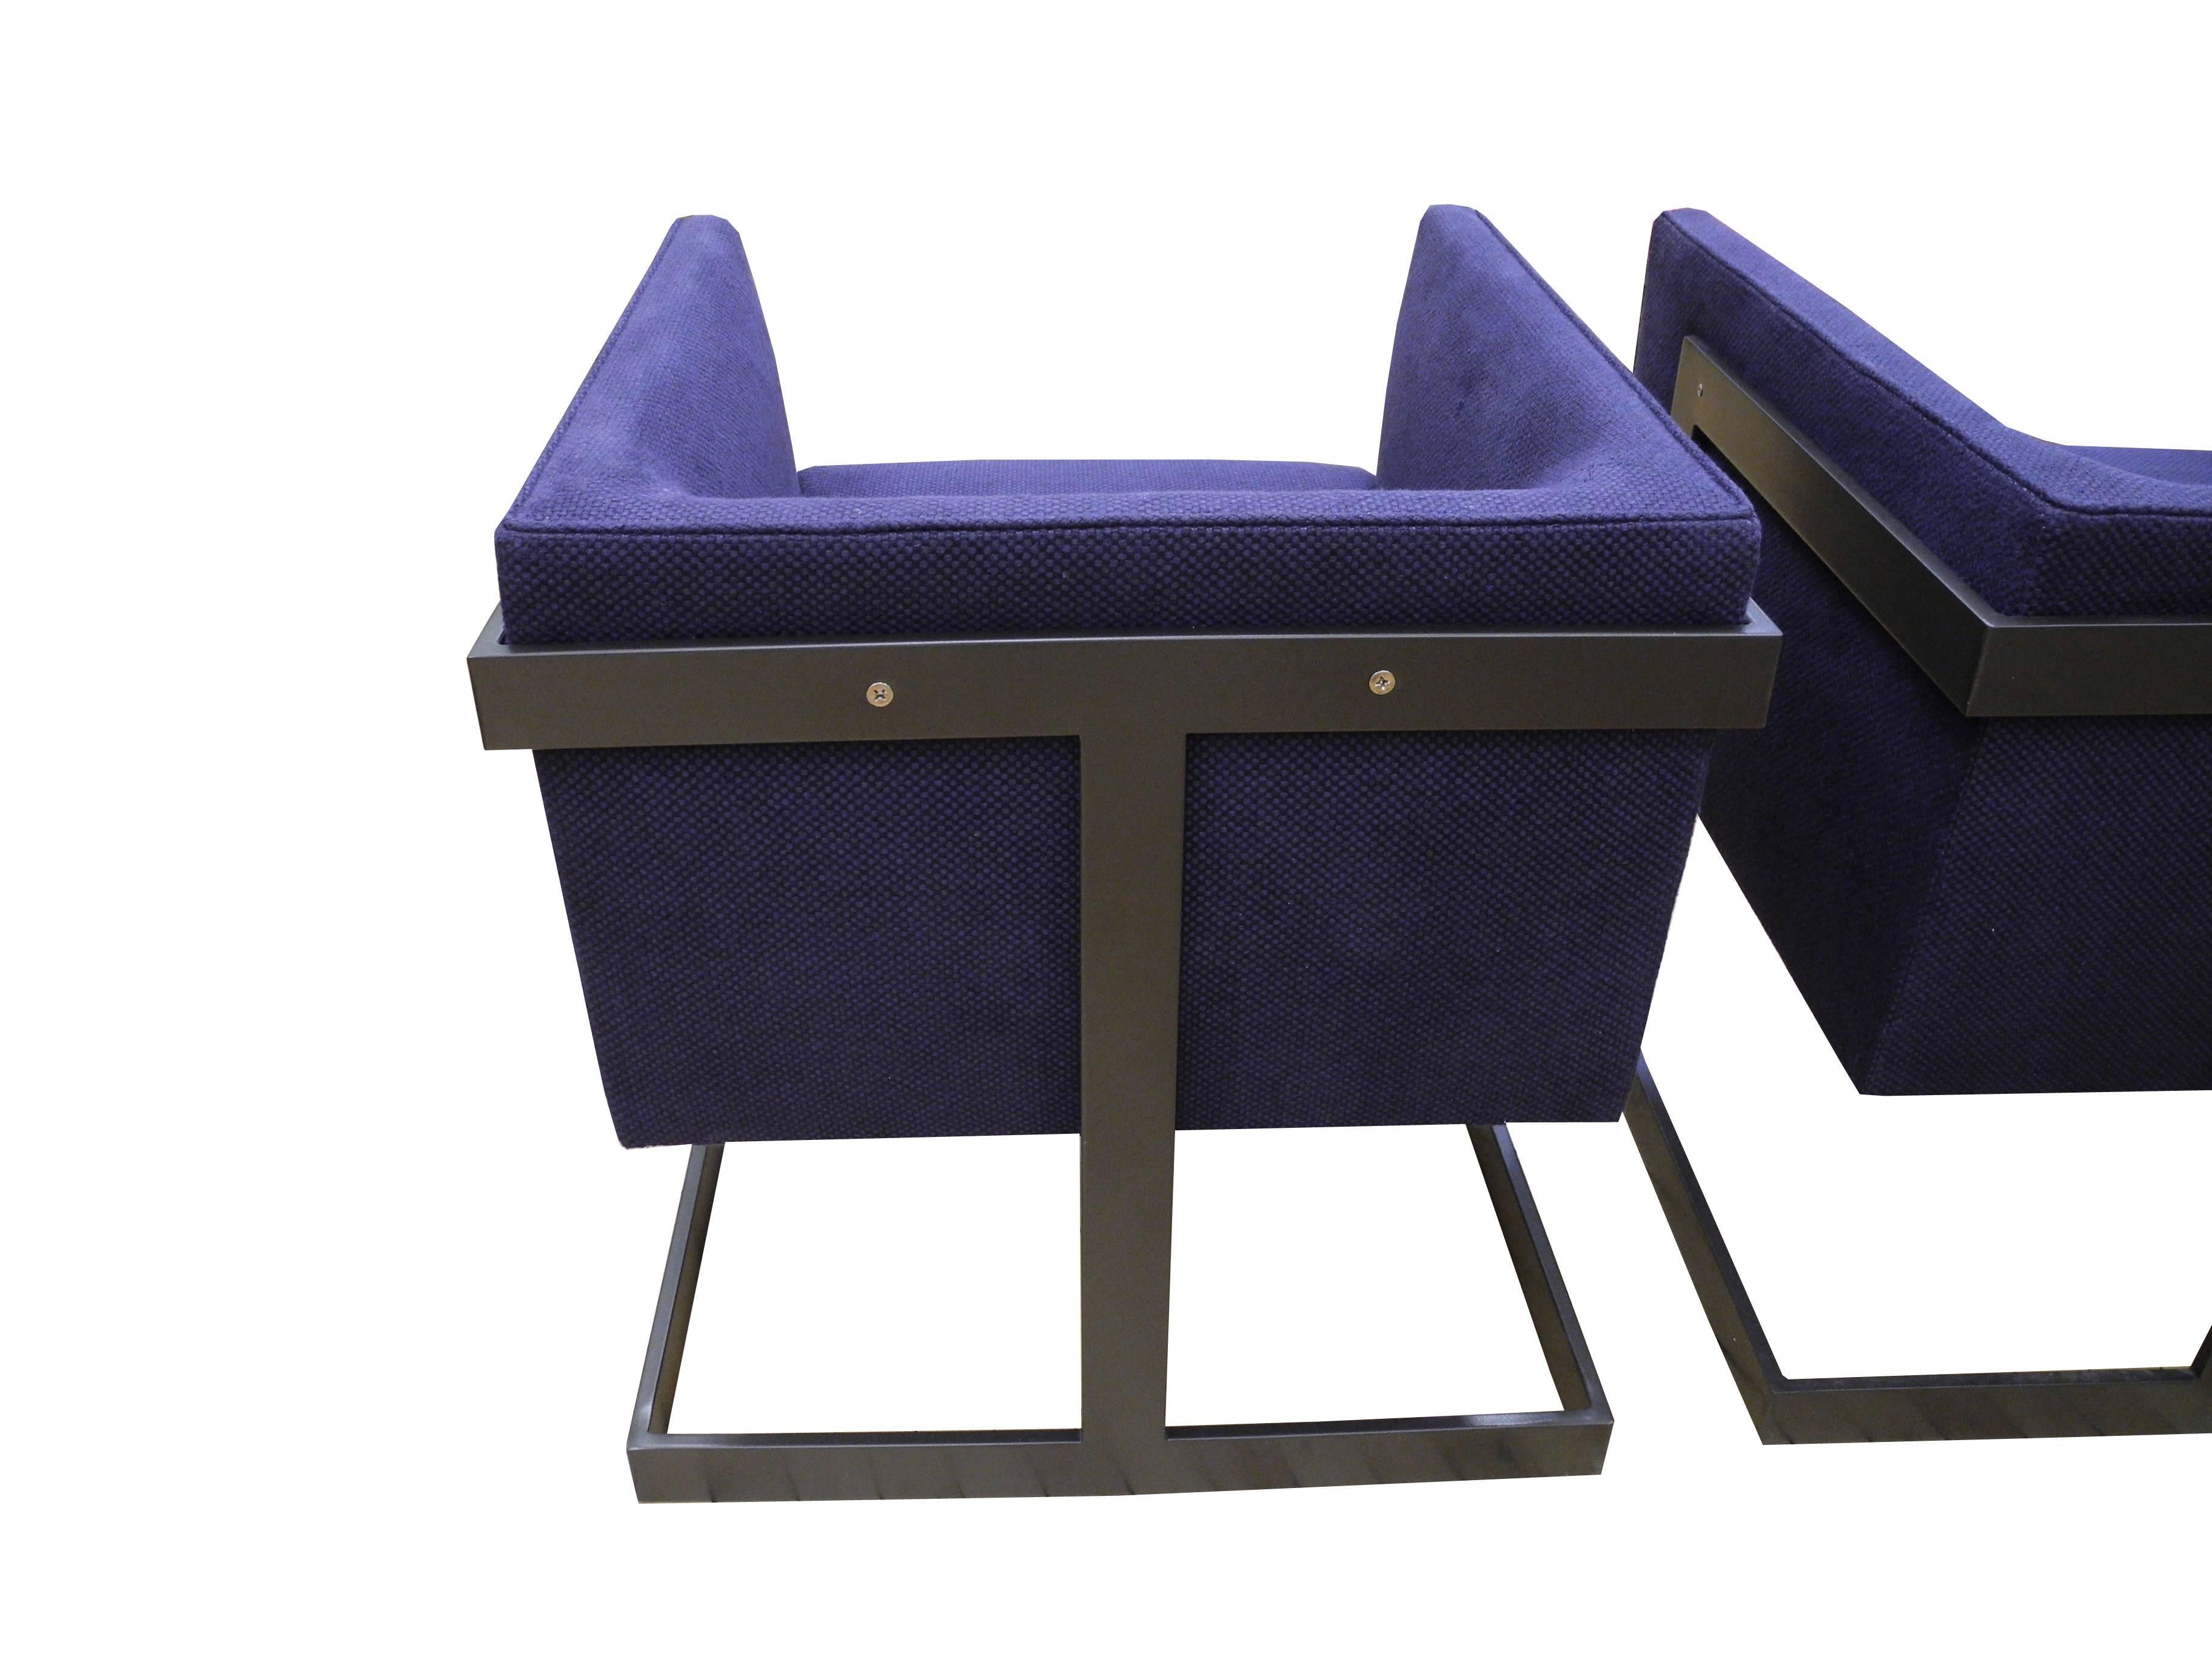 Metal Pair of Petite Modern Bronze and Navy Cubed Armchairs by Milo Baughman